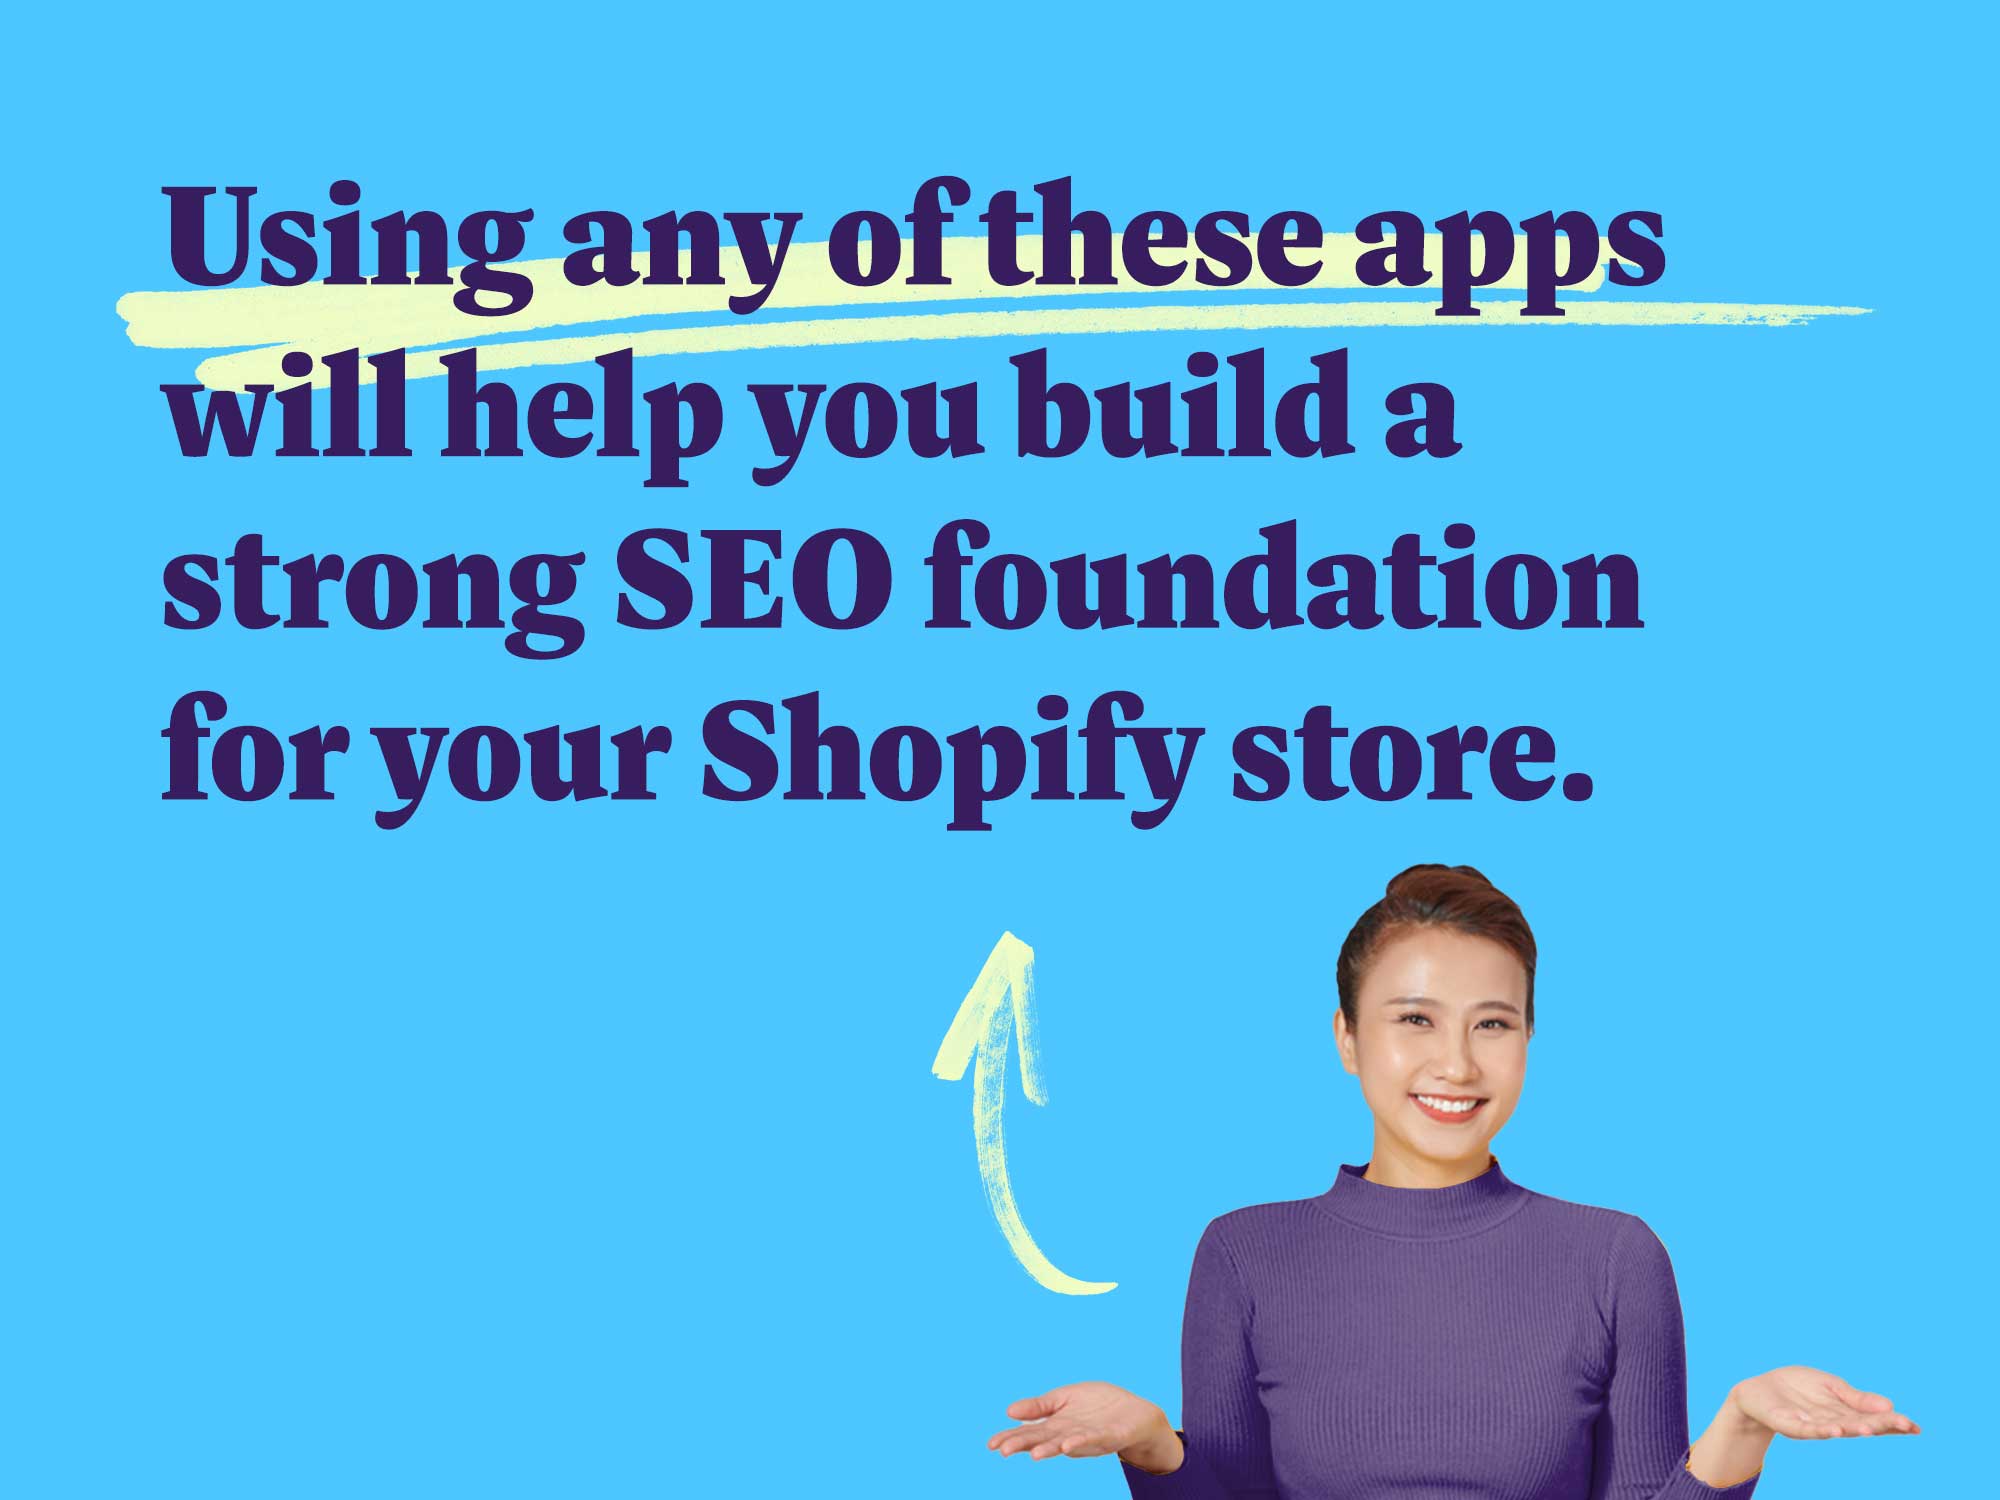 Using any of these apps will help you build a strong SEO foundation for your Shopify store.